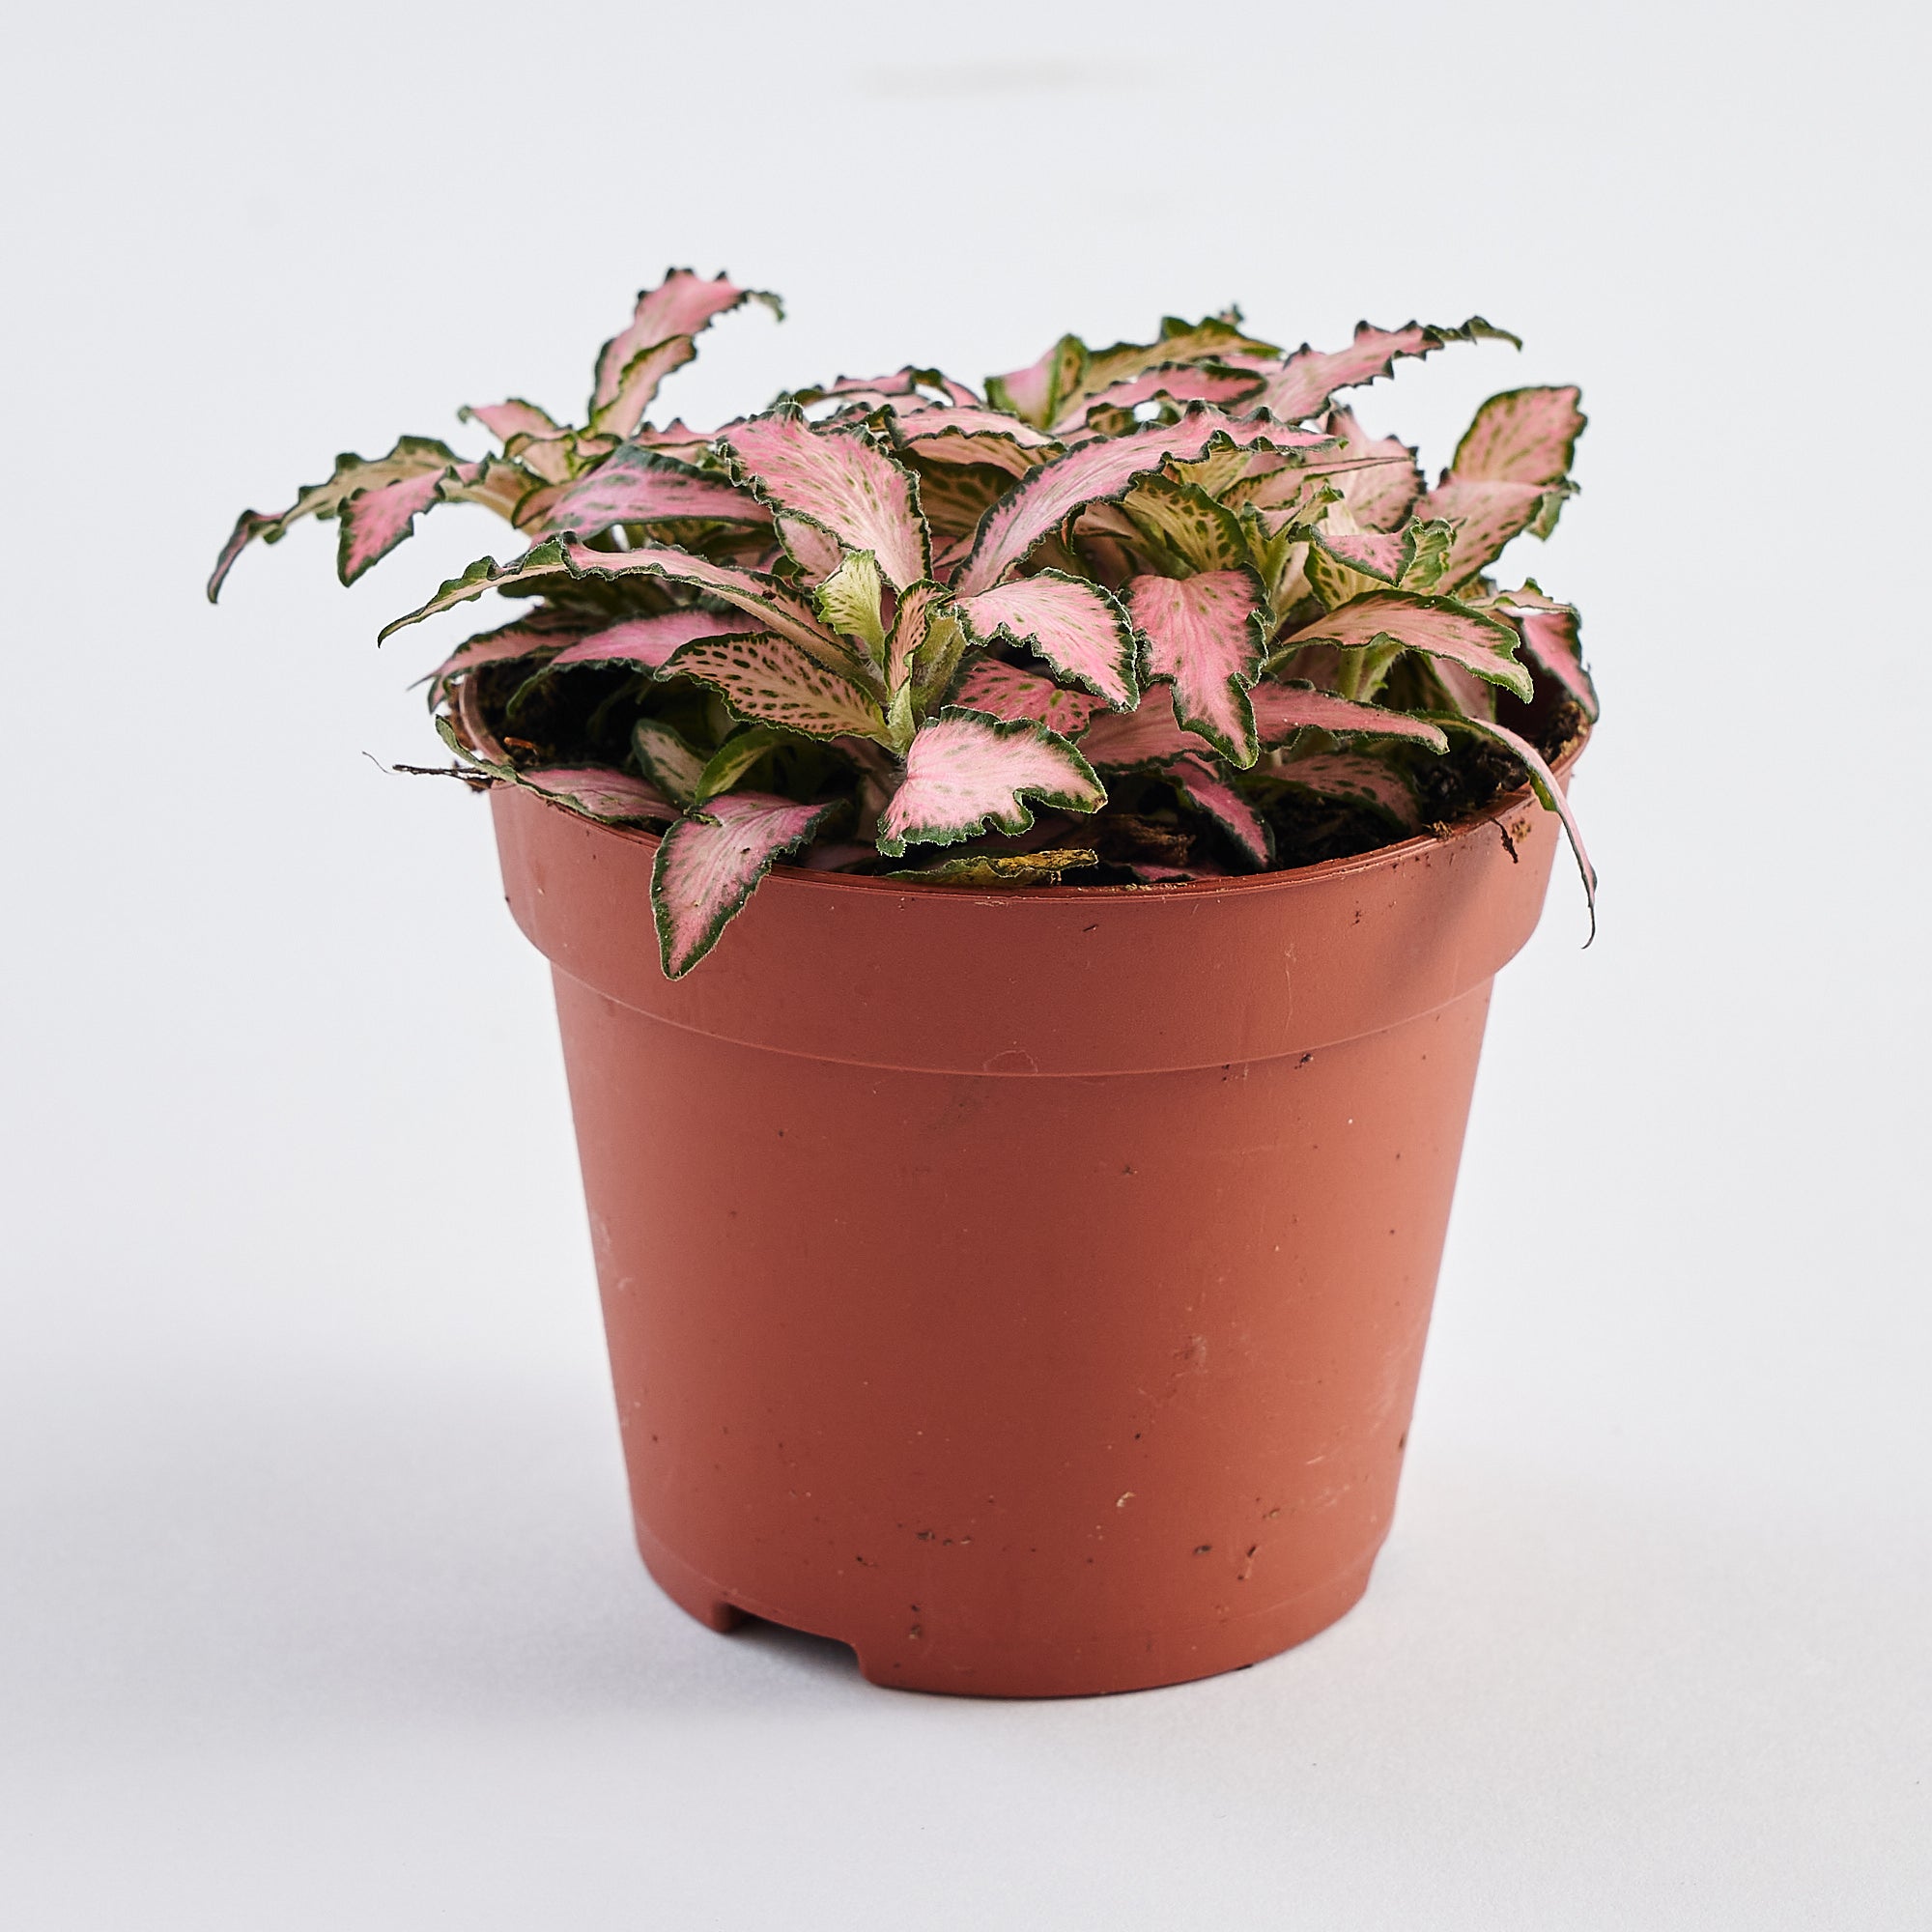 buy fittonia plant online for london and UK nationwide delivery